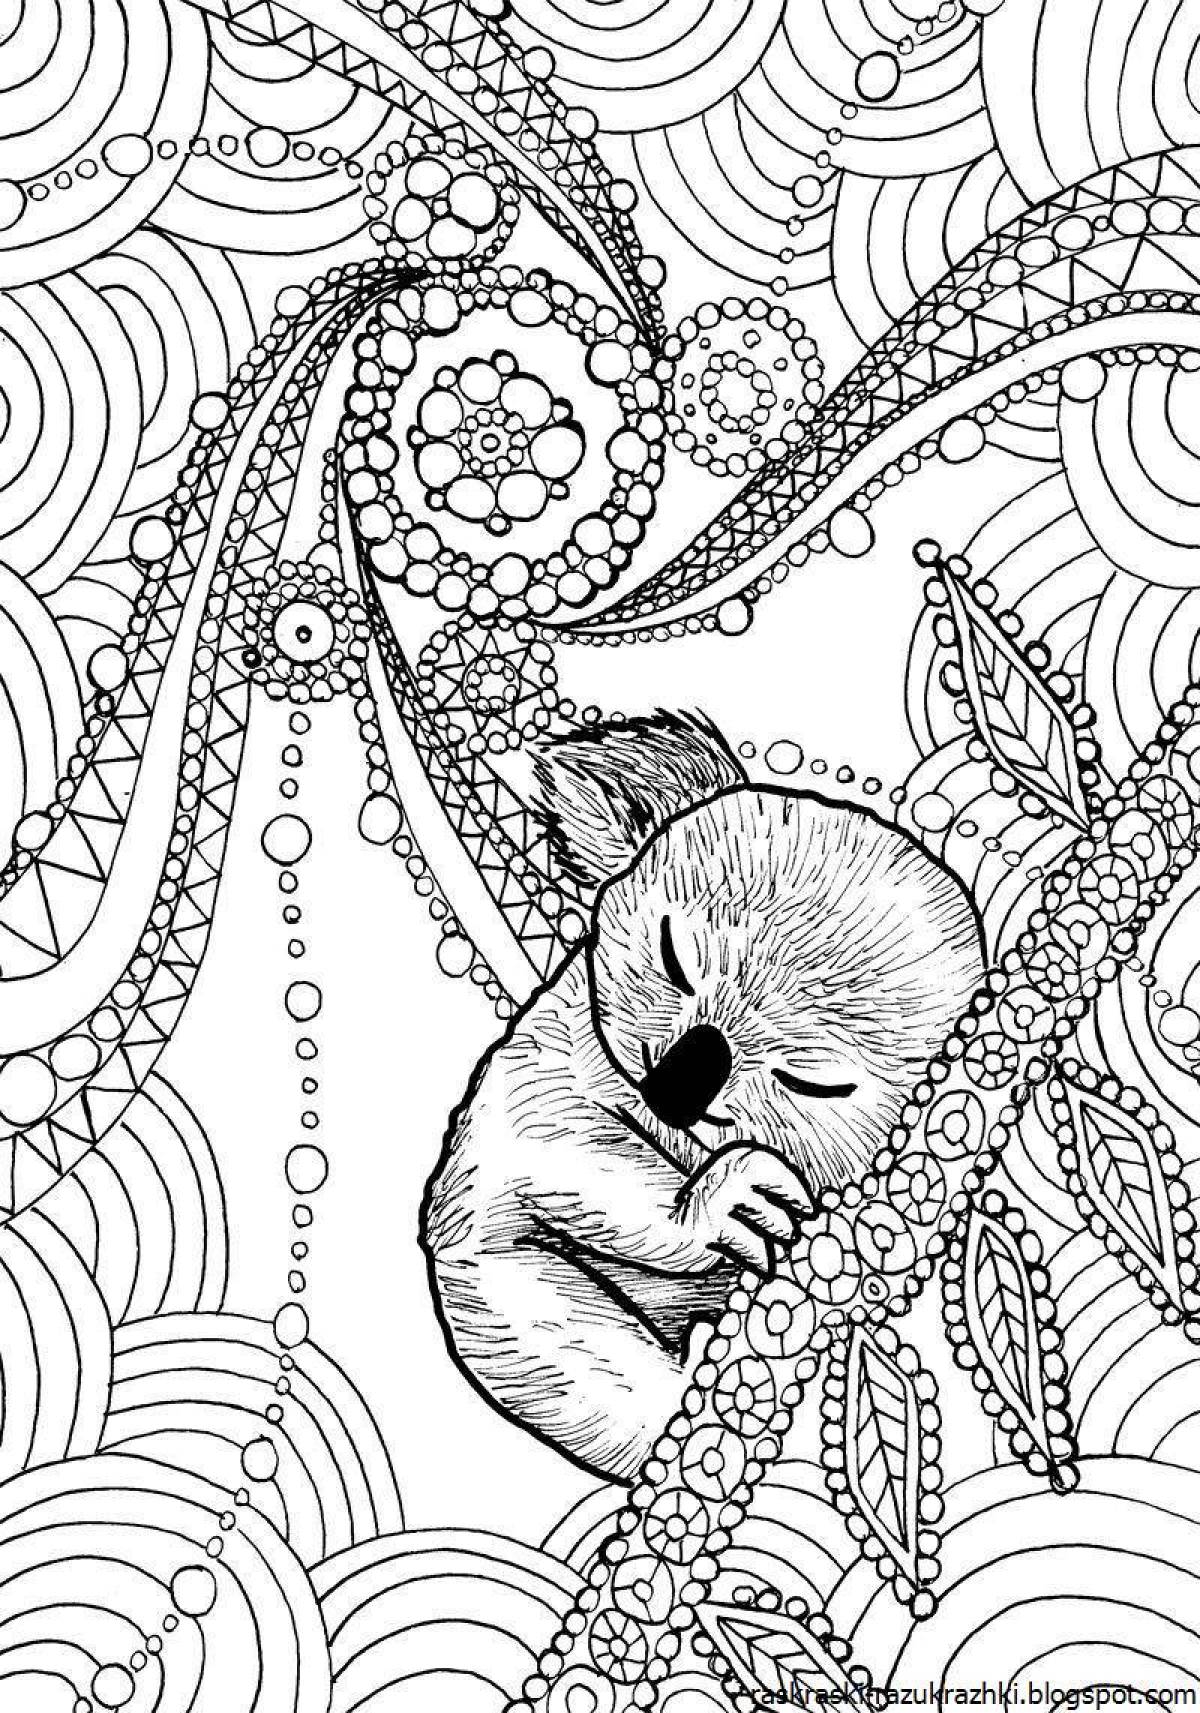 Extensive coloring page very complex